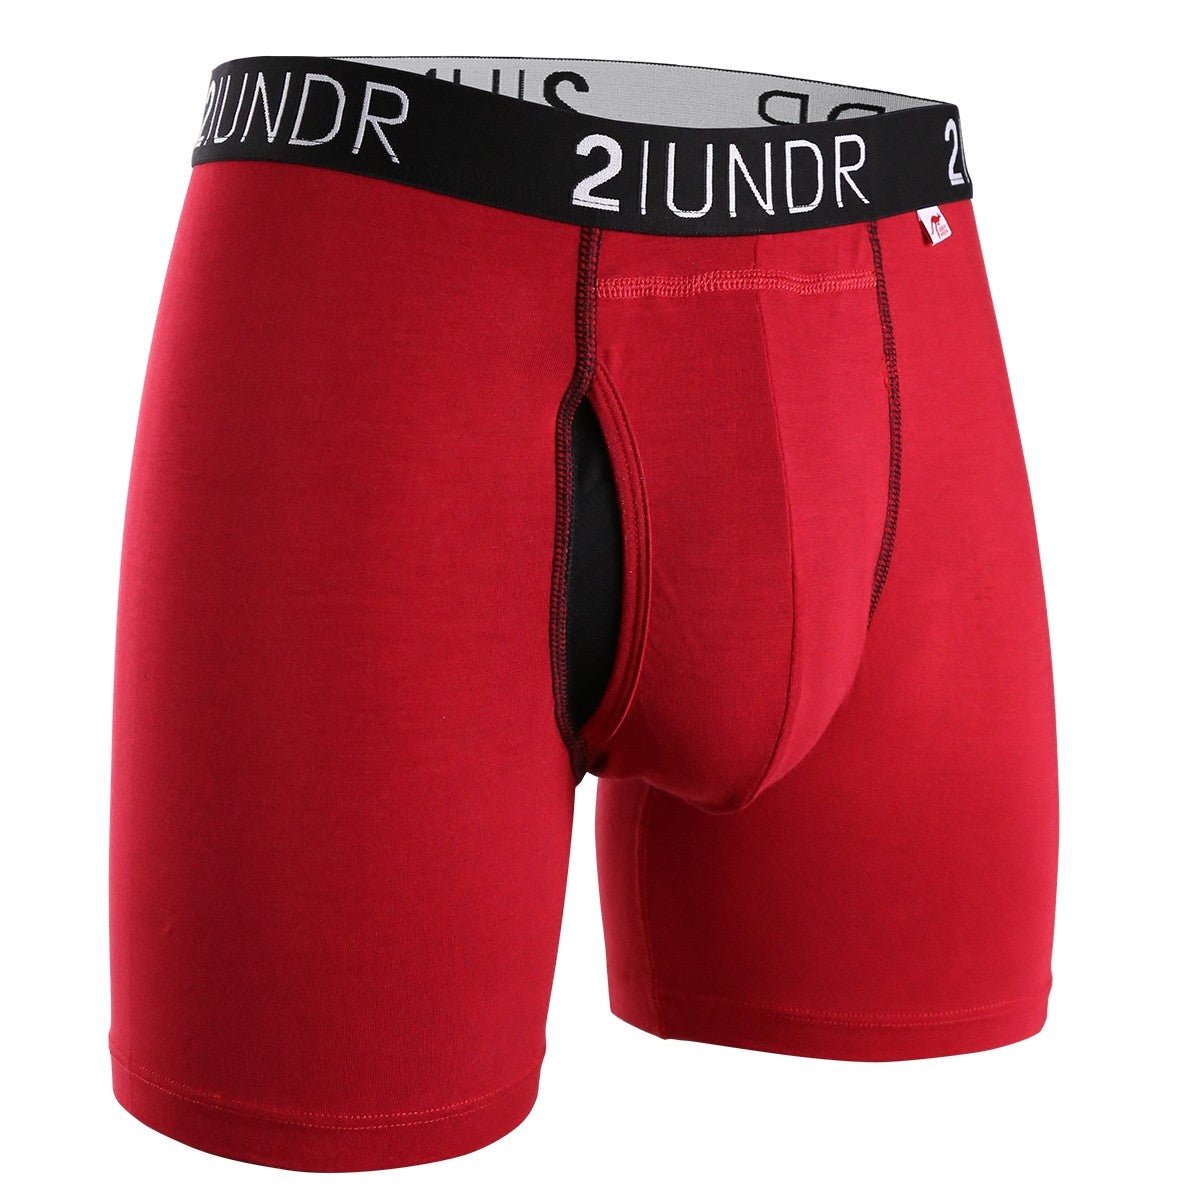 2Undr Swing Shift Boxer Brief Solid - RED - My Filosophy